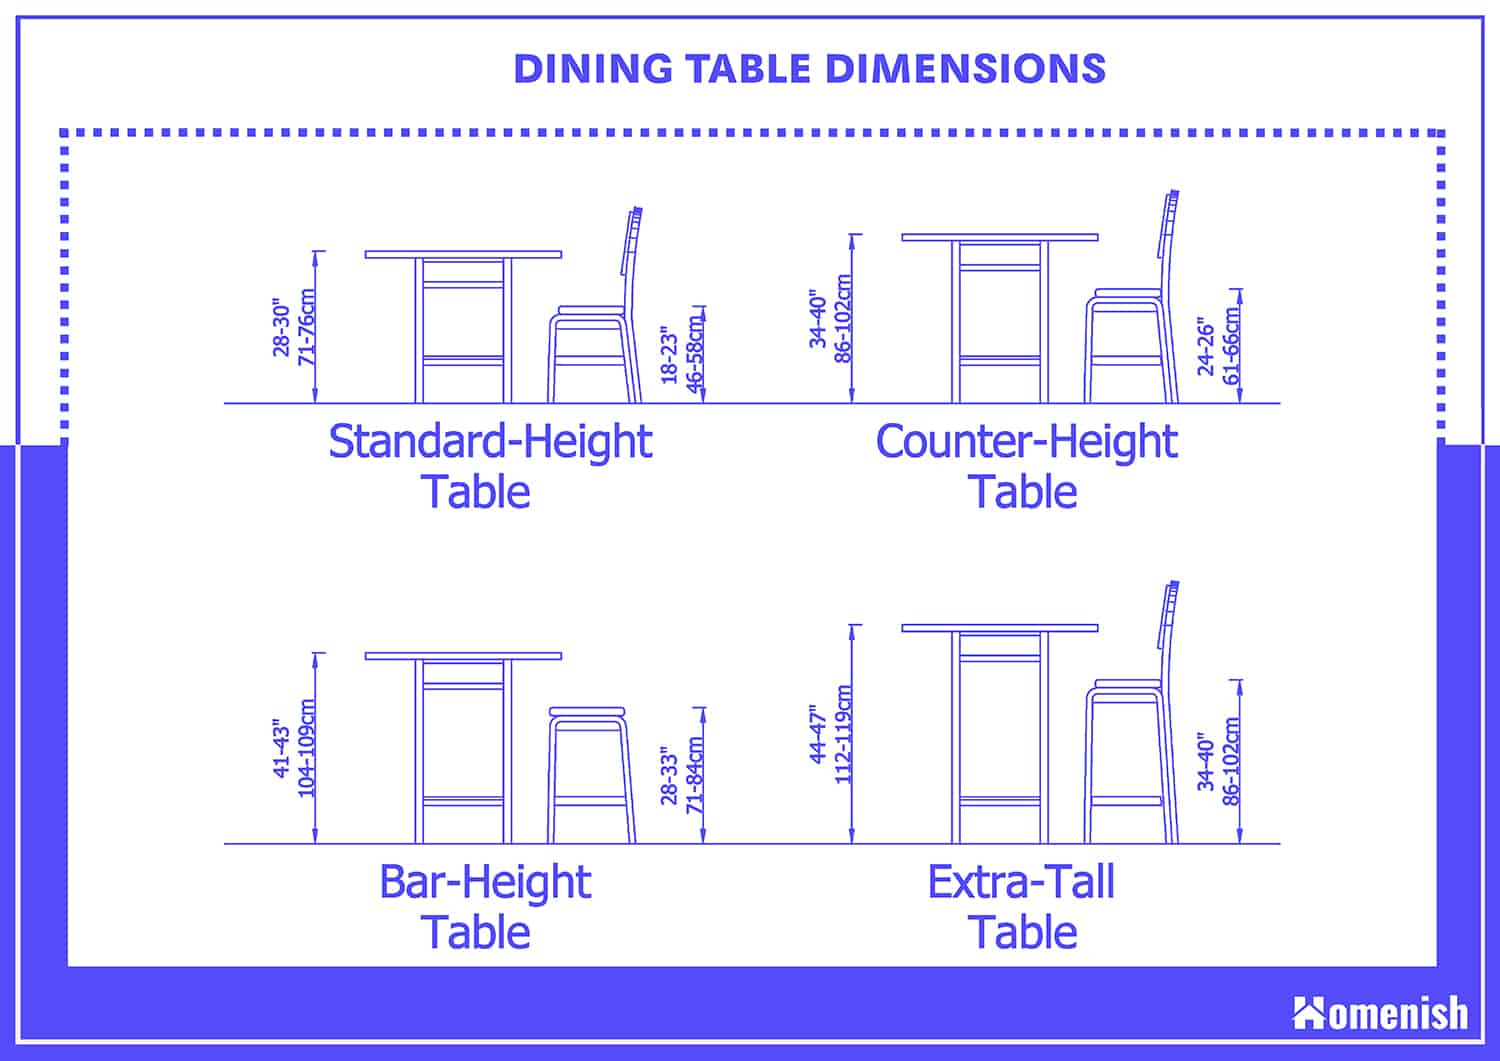 Standard Dining Table Dimensions, What Is The Normal Size Of A Dining Room Table